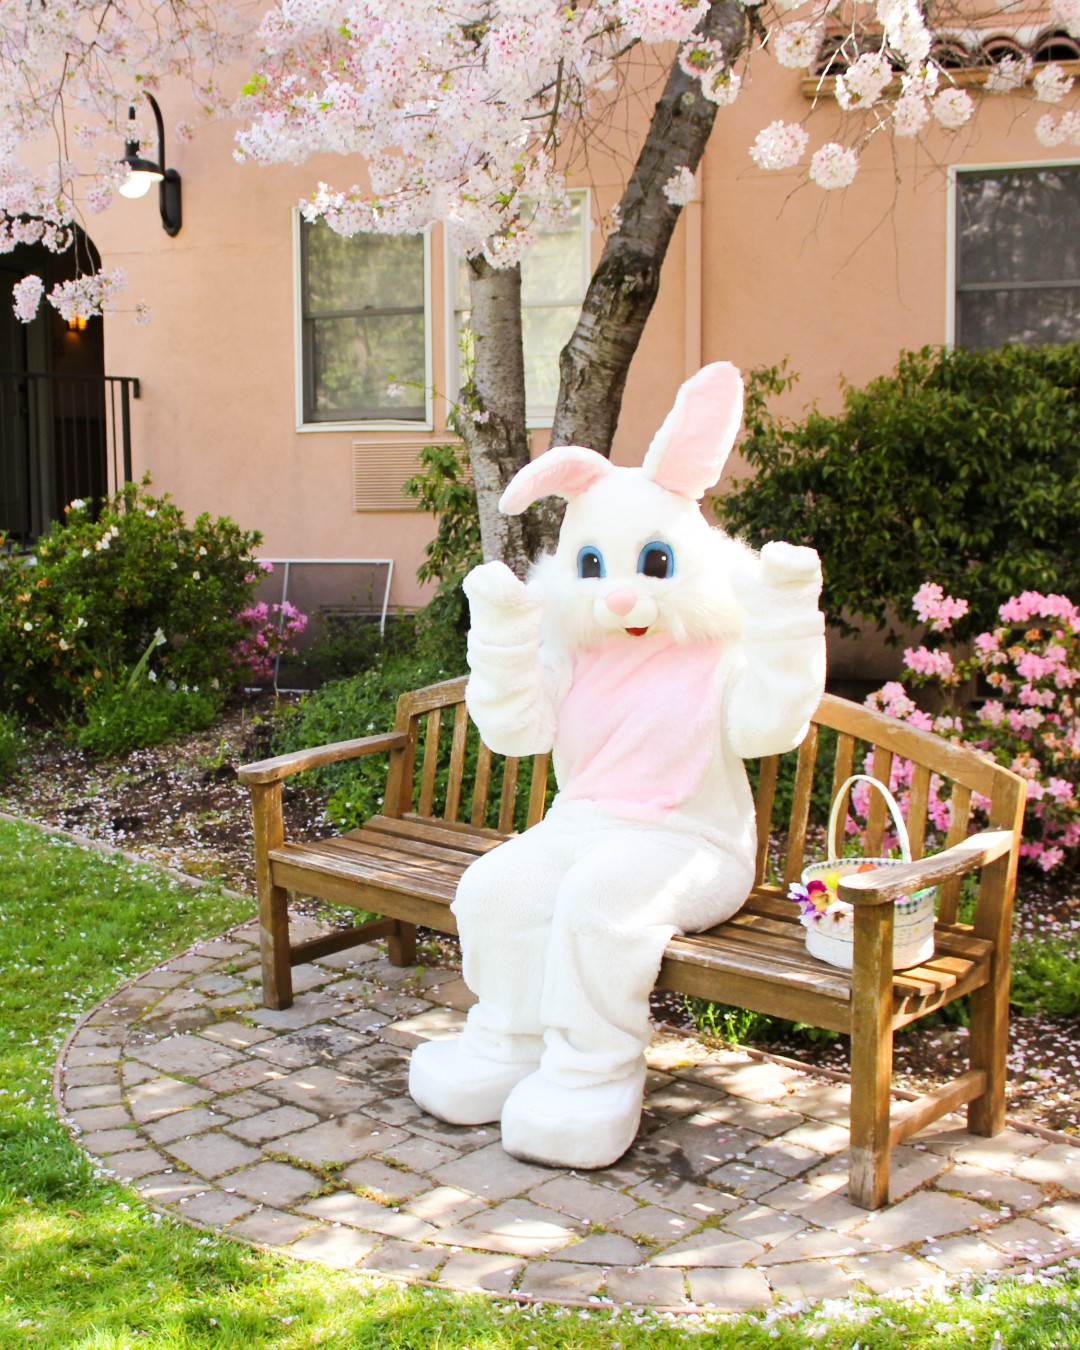 Fairmont Sonoma Mission Inn hosts an Easter egg hunt at 10 a.m., followed by brunch 10:30 a.m. to 2:30. (Fairmont Sonoma Mission Inn)